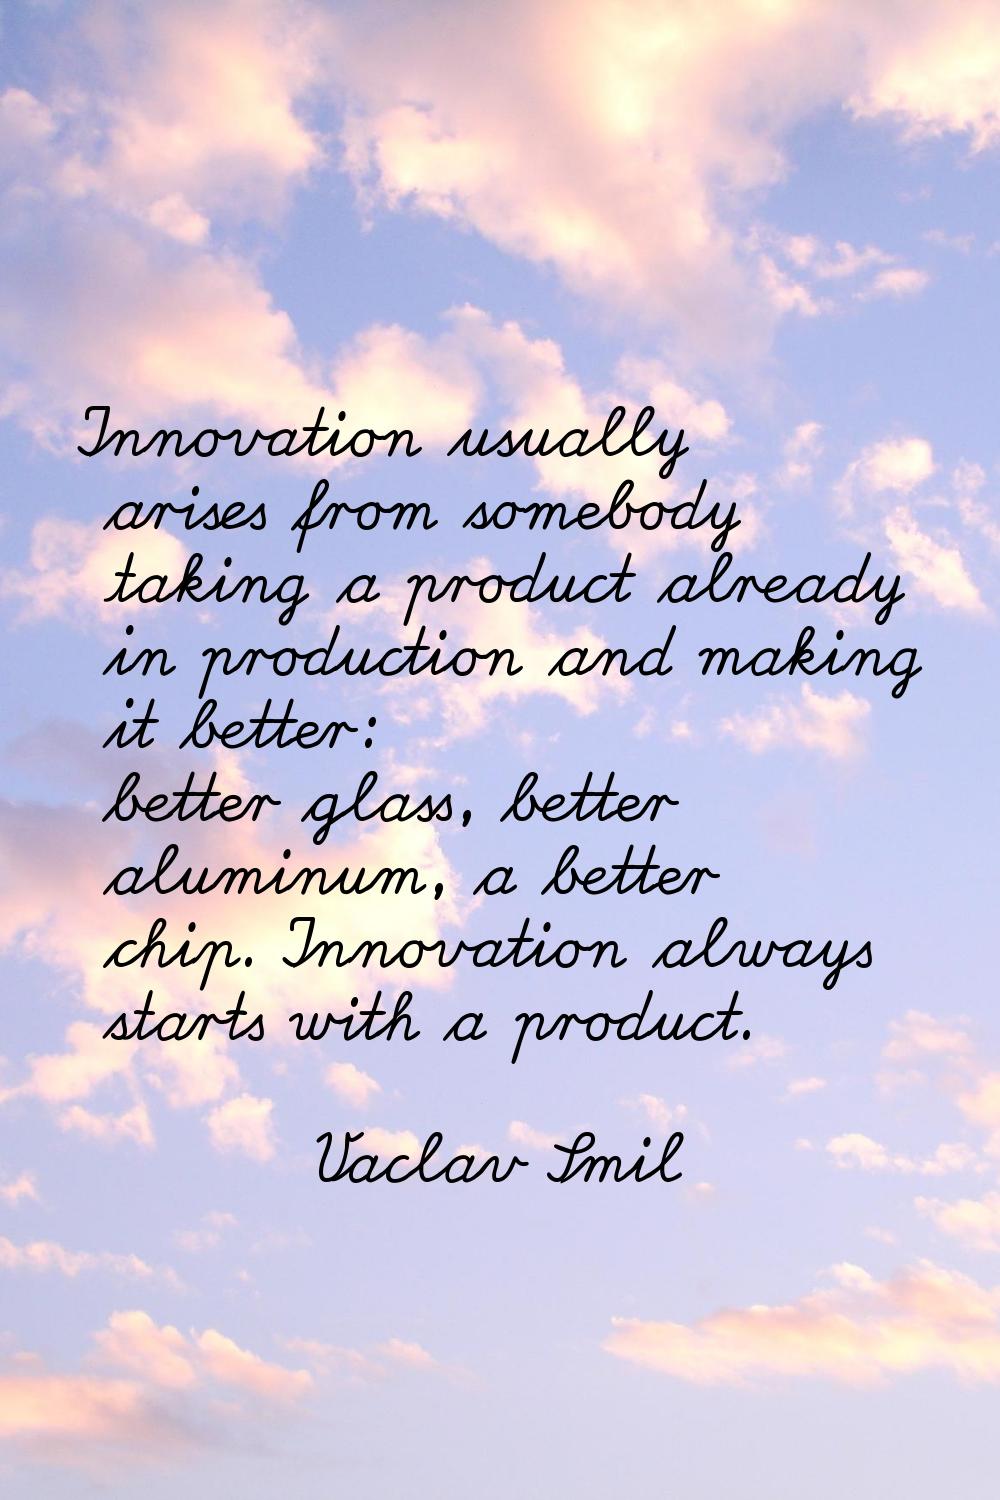 Innovation usually arises from somebody taking a product already in production and making it better